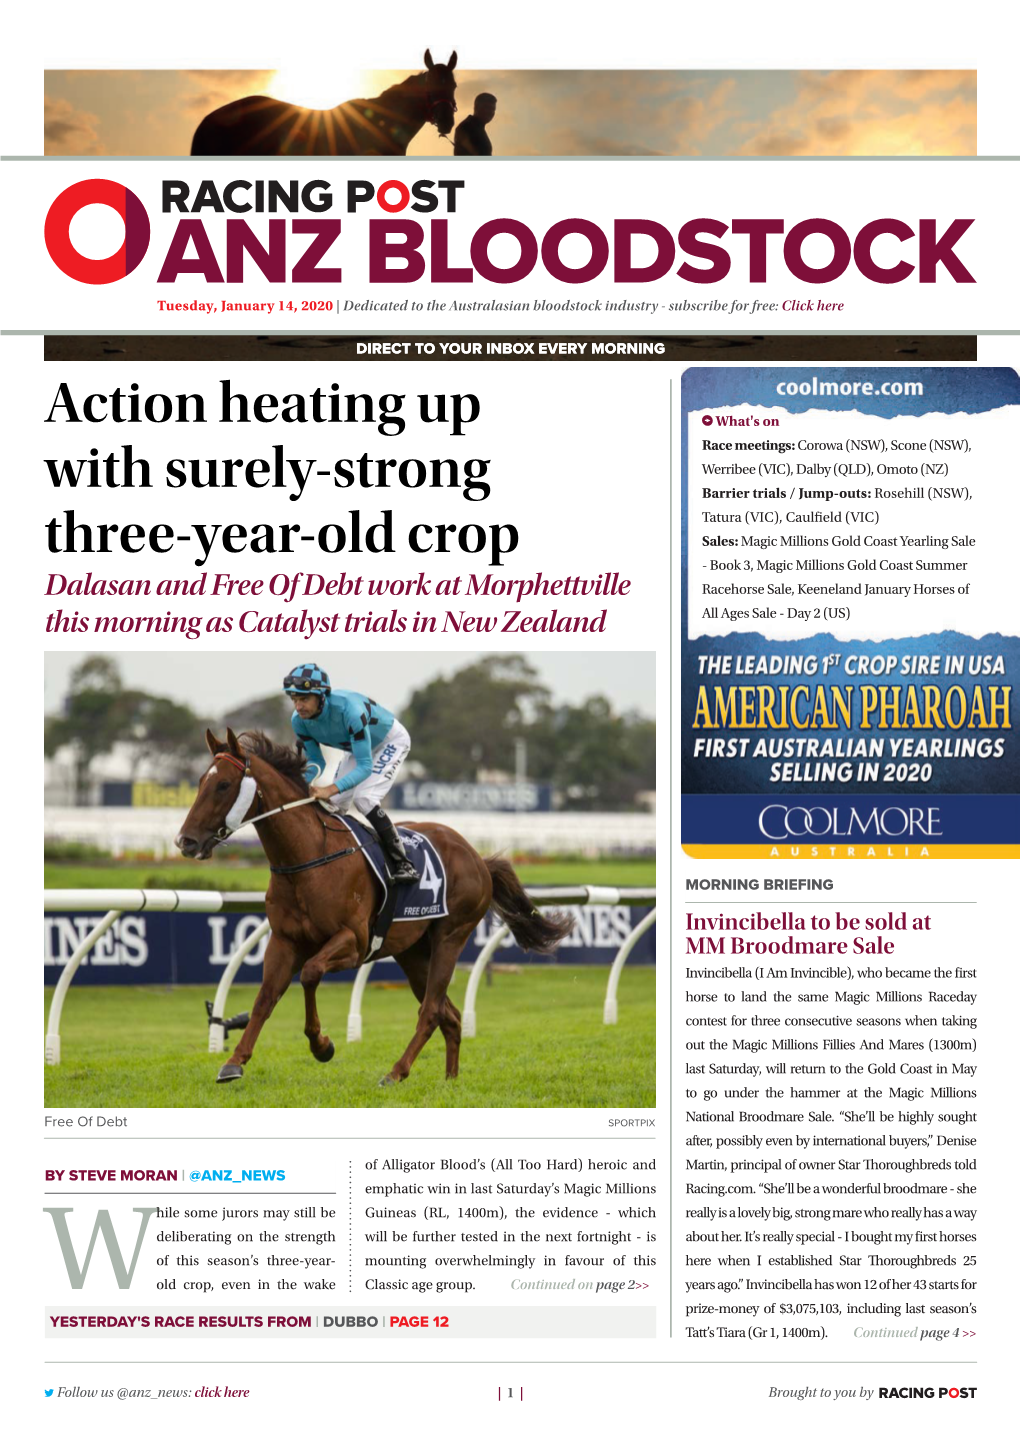 Action Heating up with Surely-Strong Three-Year-Old Crop | 3 | Tuesday, January 14, 2020